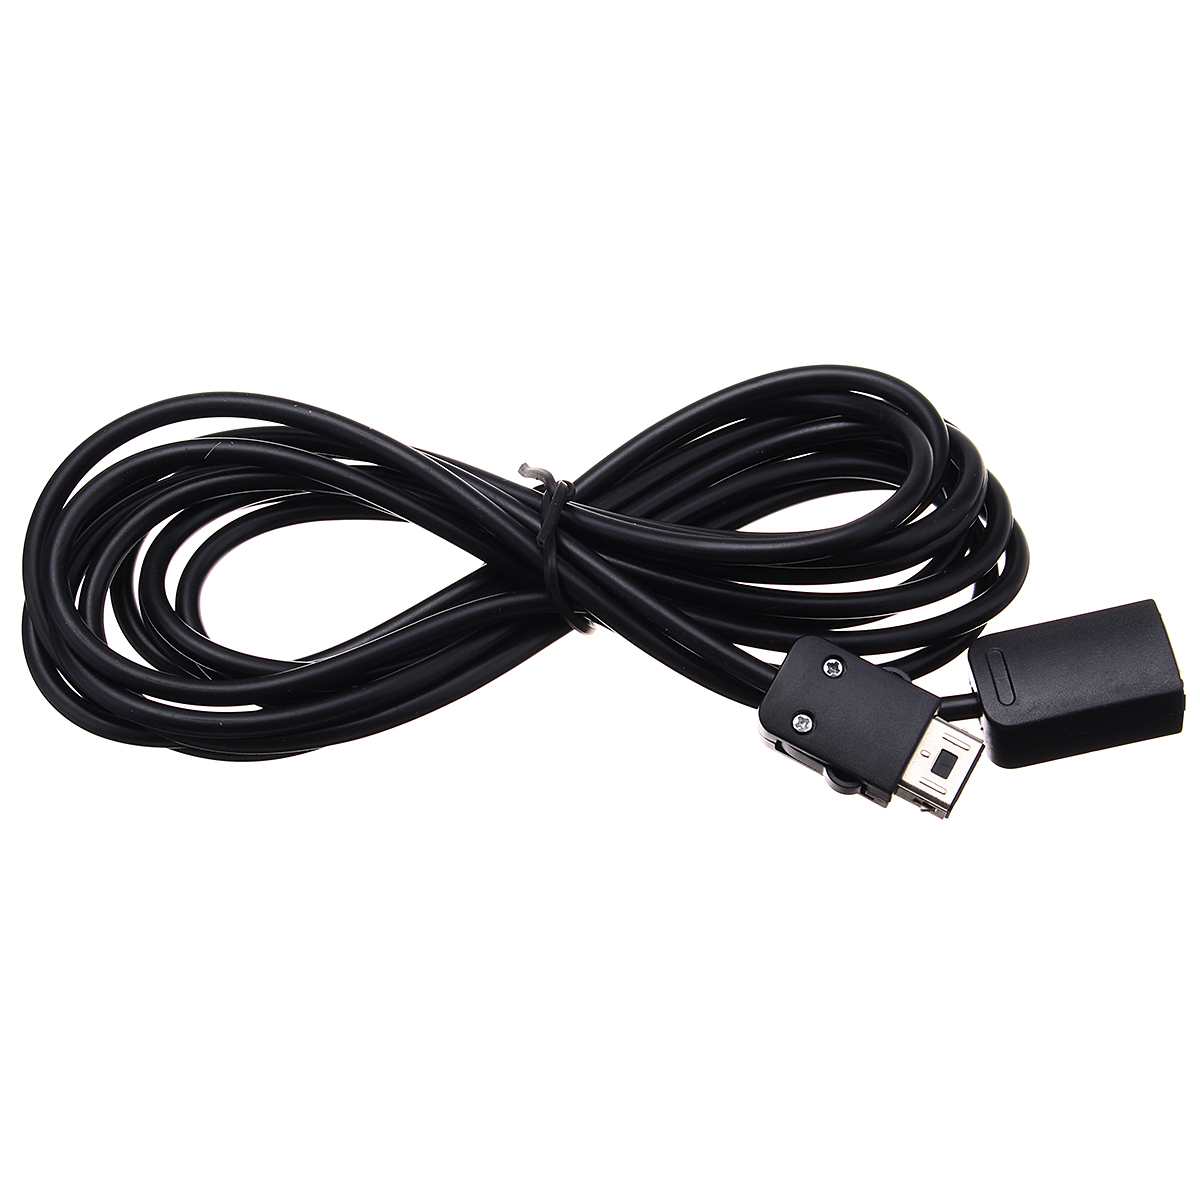 

10inch USB Extension Cable Cord Lead For Nintendo Mini NES Classic Edition Game Controller